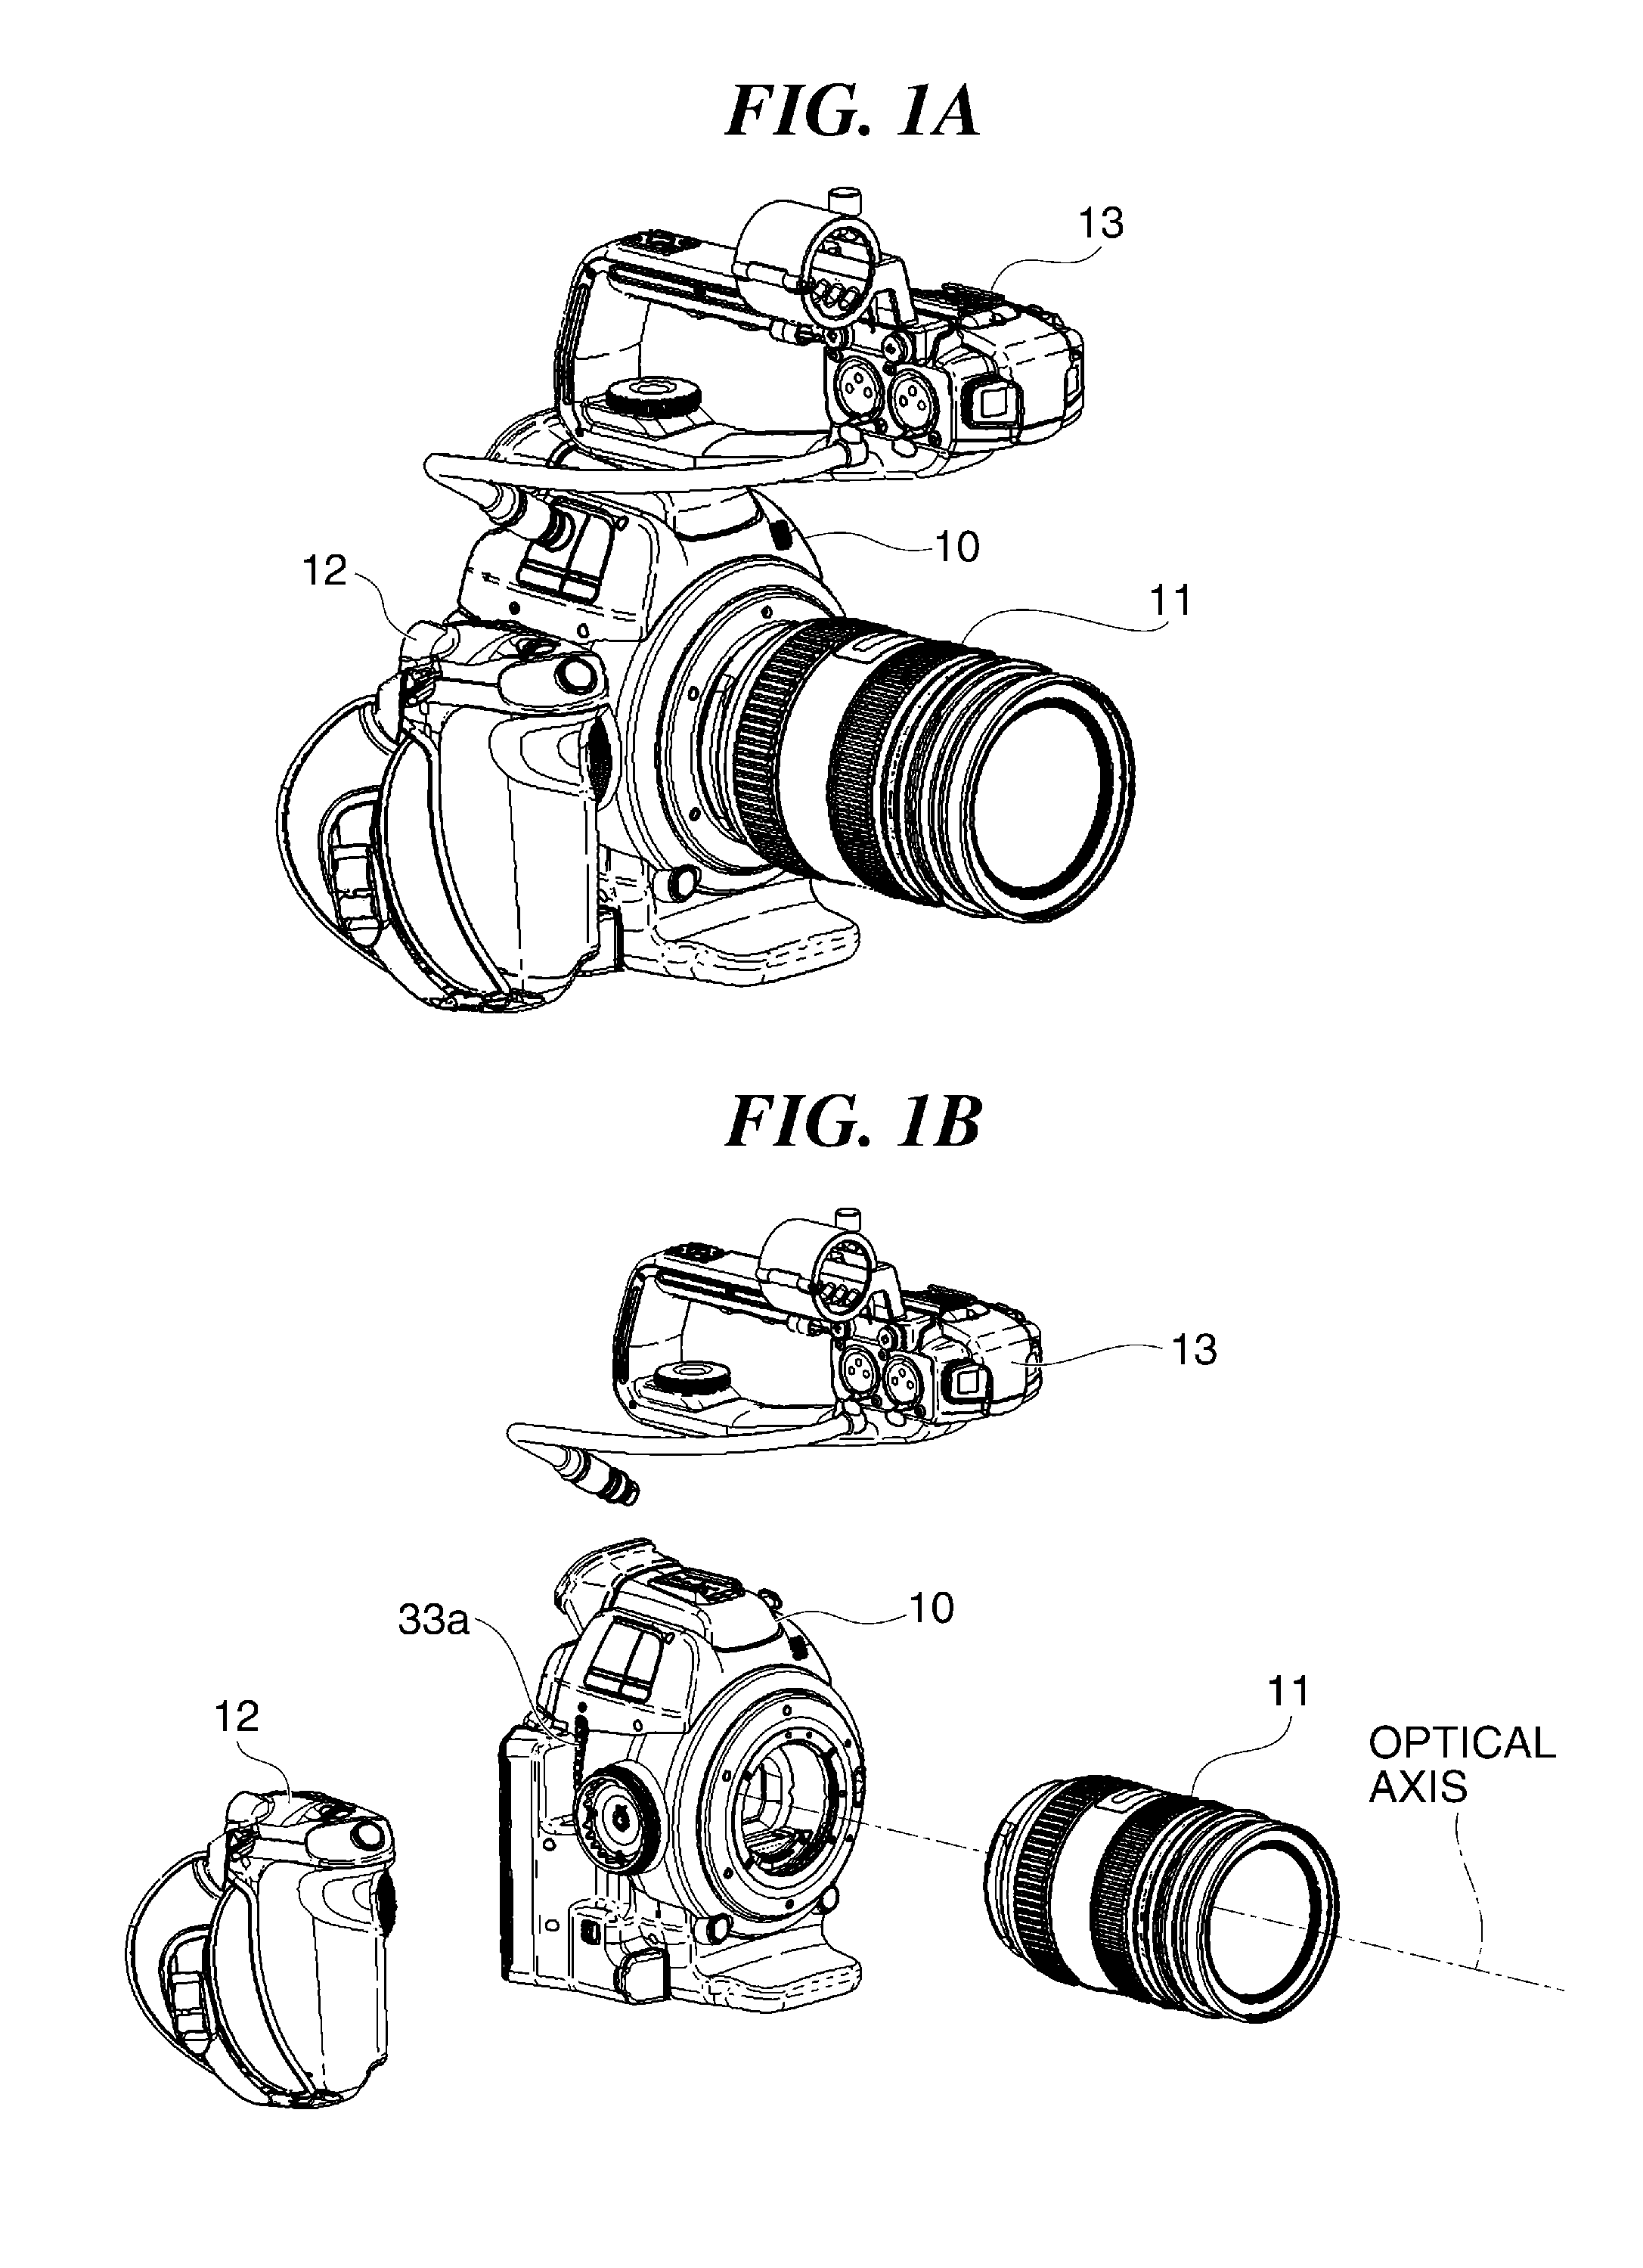 Image pickup apparatus with air cooling unit